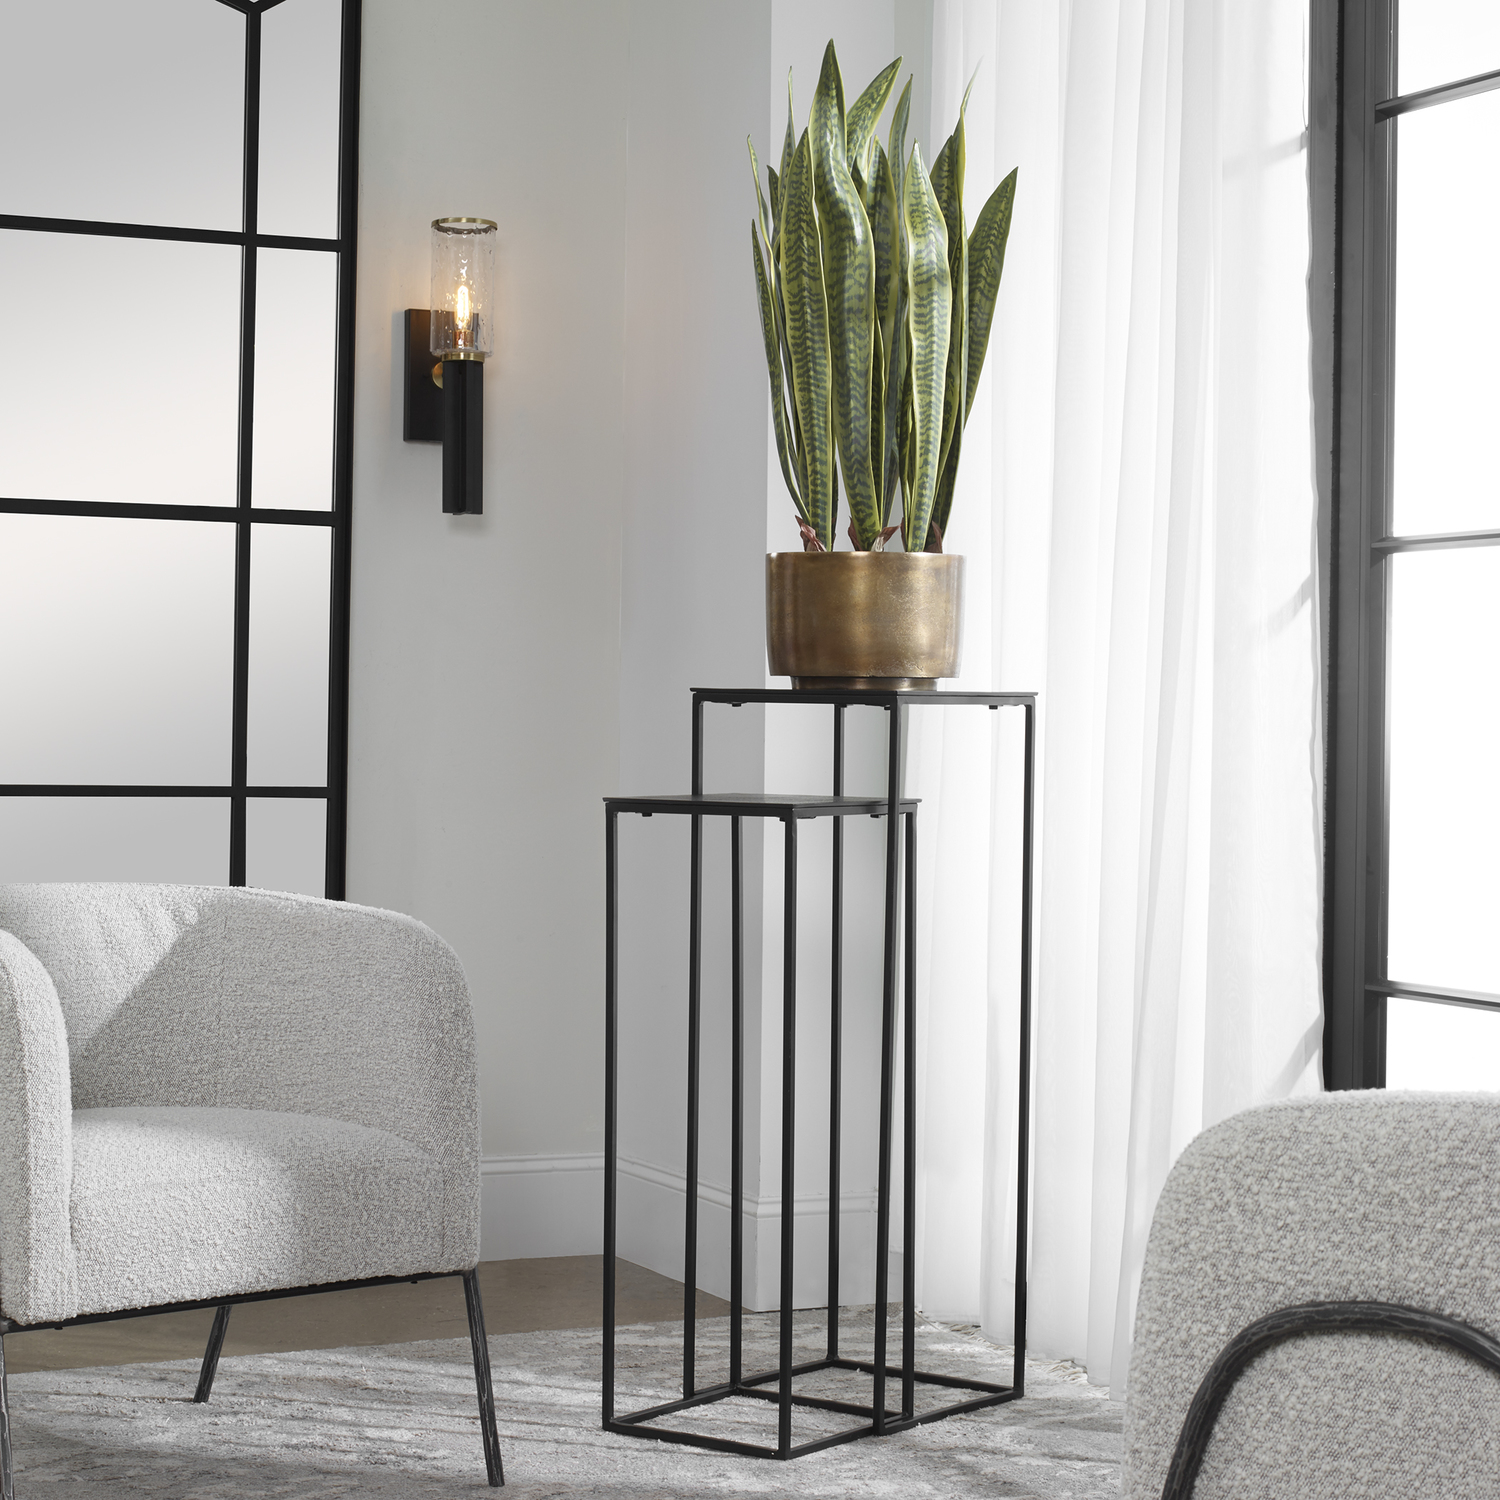 vintage mid century modern coffee table Uttermost Accent & End Tables Functional Nesting Pedestals Constructed In An Aged Black Iron, Featuring A Textured Cast Aluminum Slab Top Finished In A Plated Antique Bronze. Sizes: Sm-13x34x13, Lg-14x40x14